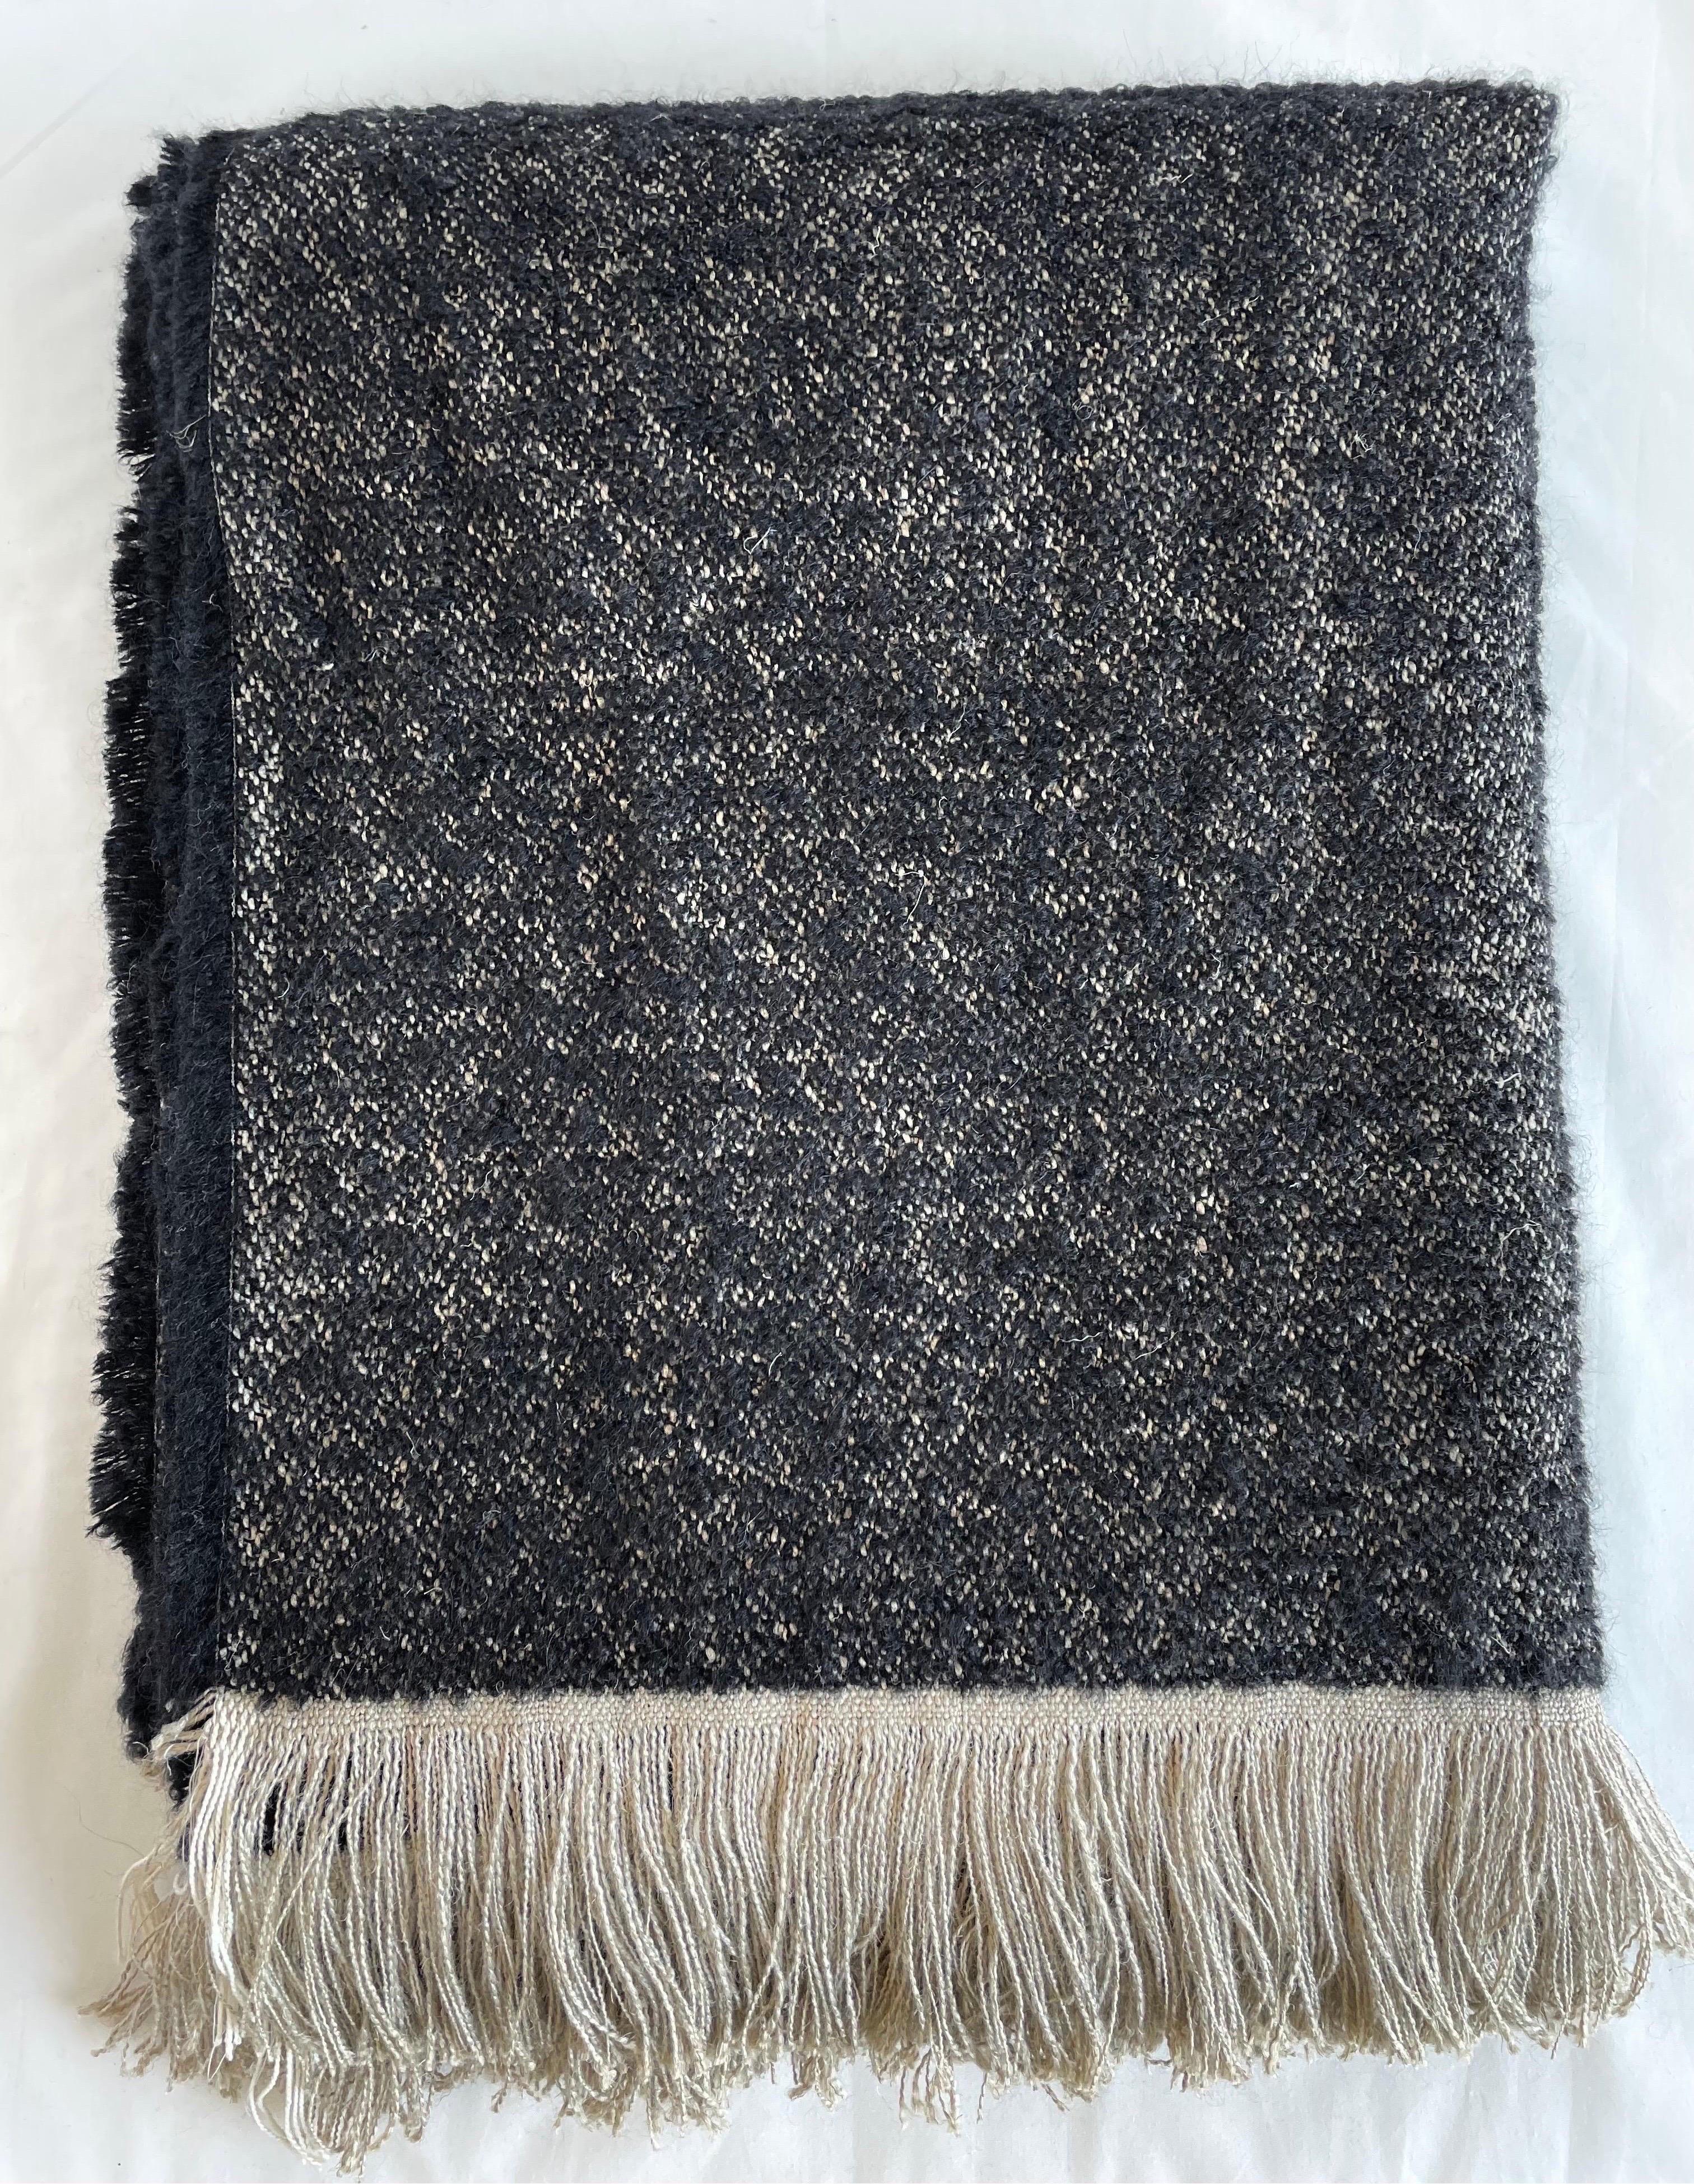 Woven in Belgium using traditional weaving techniques, Bloom Home Inc Winnie features a combination of smooth Belgian Linen and woolly Alpaca. This combination of fibers forms an exquisite touch and weight, and a texture that looks as warm as it